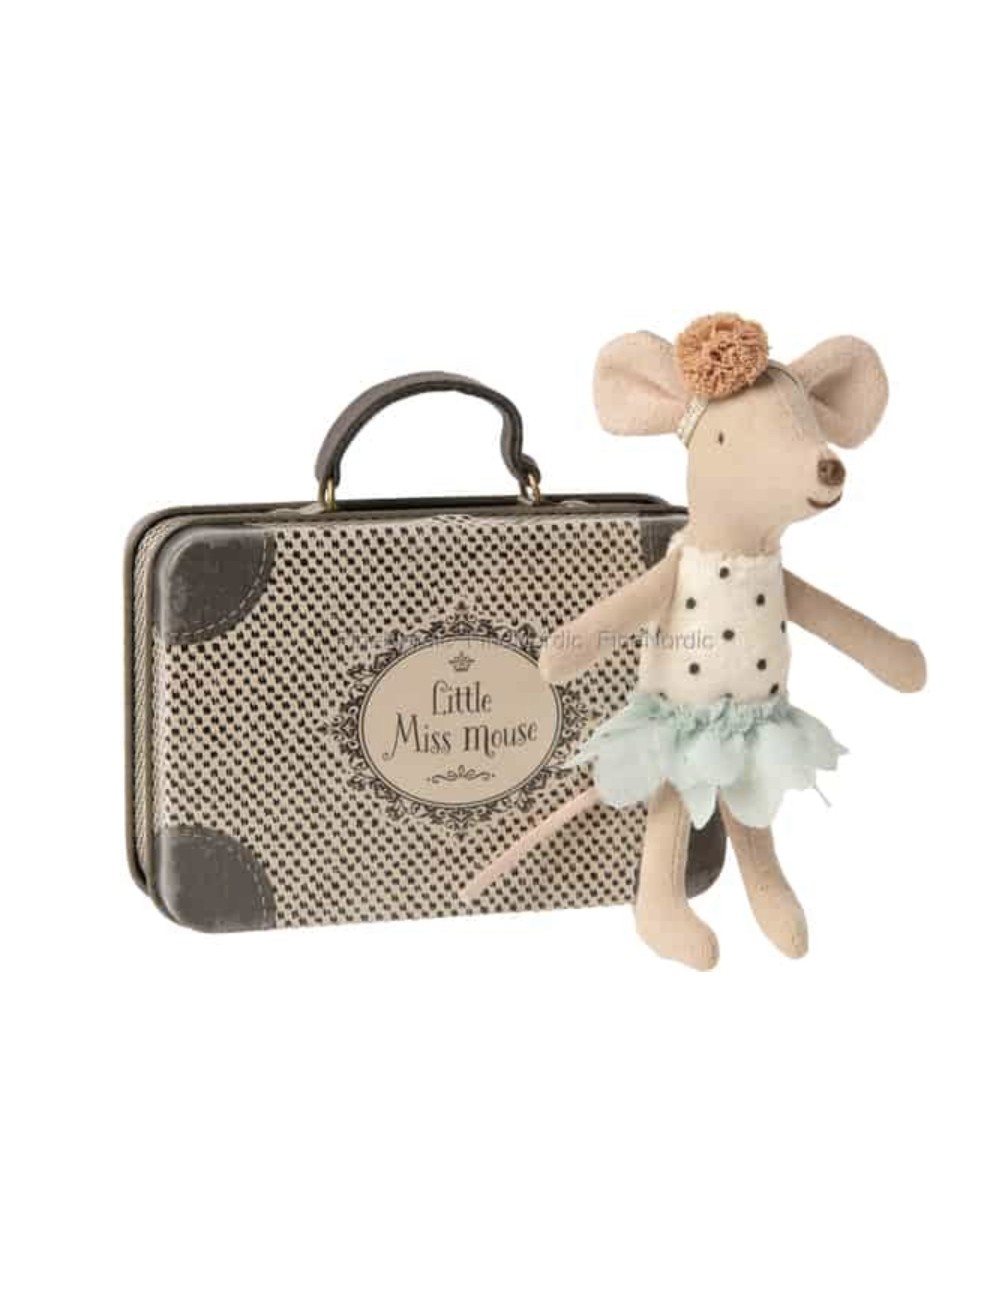 little miss mouse in suitcase Maileg